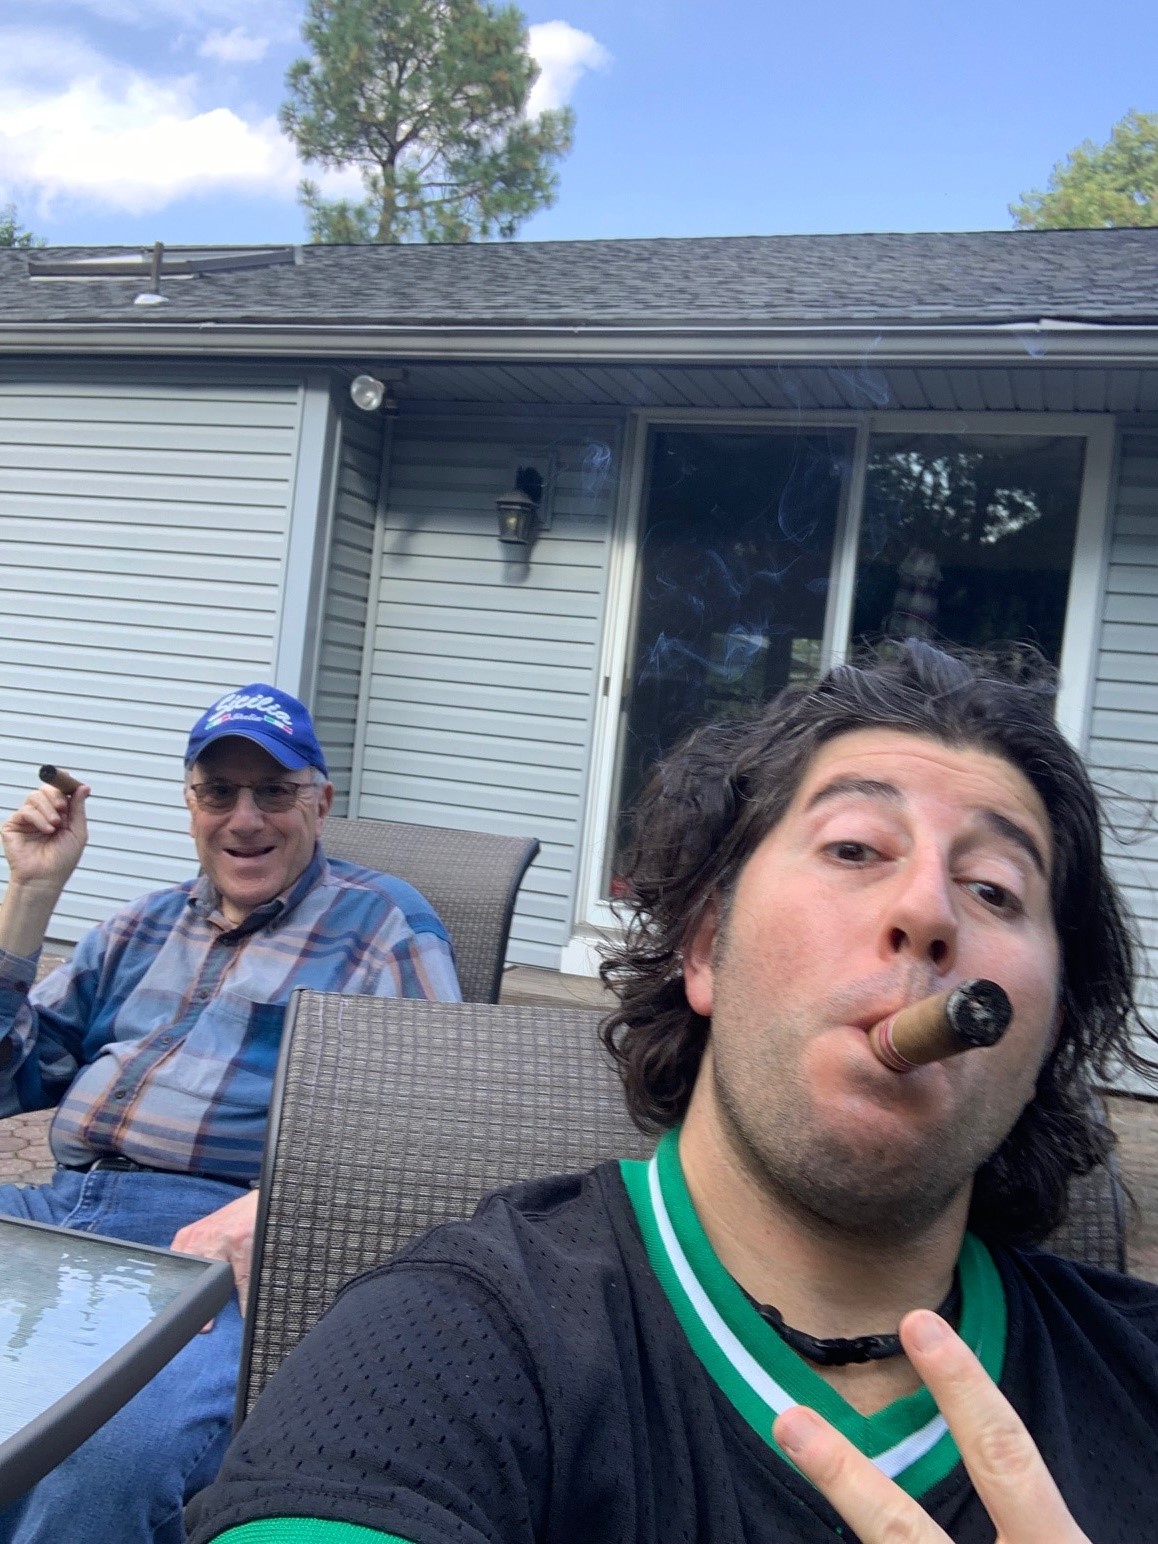 Lee eats (smokes) more cigars with JP.